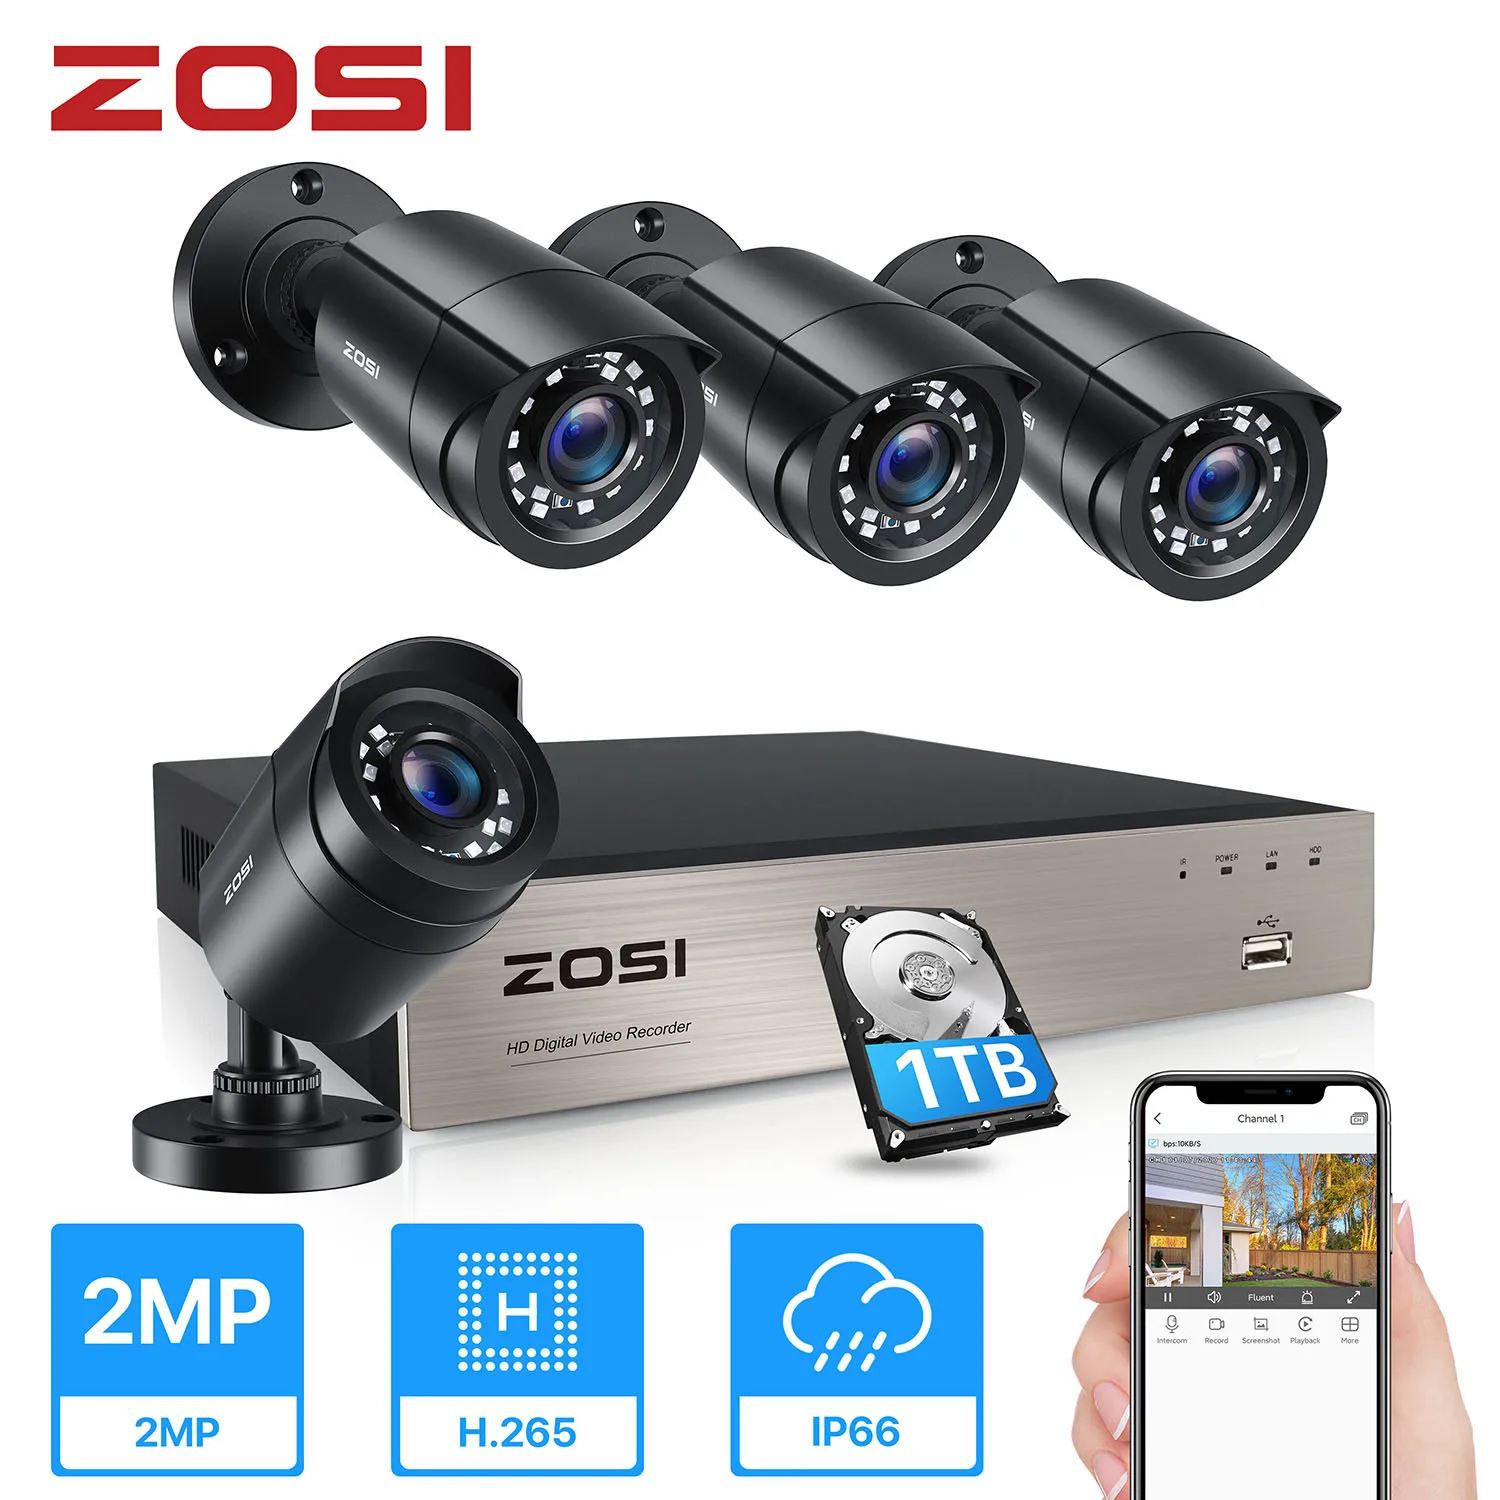 US $104.42 Zosi Cctv System H265 8ch Dvr With 4 1080p Outdoor Security Camera Dvr Kit DayNight Home Video Surveillance System